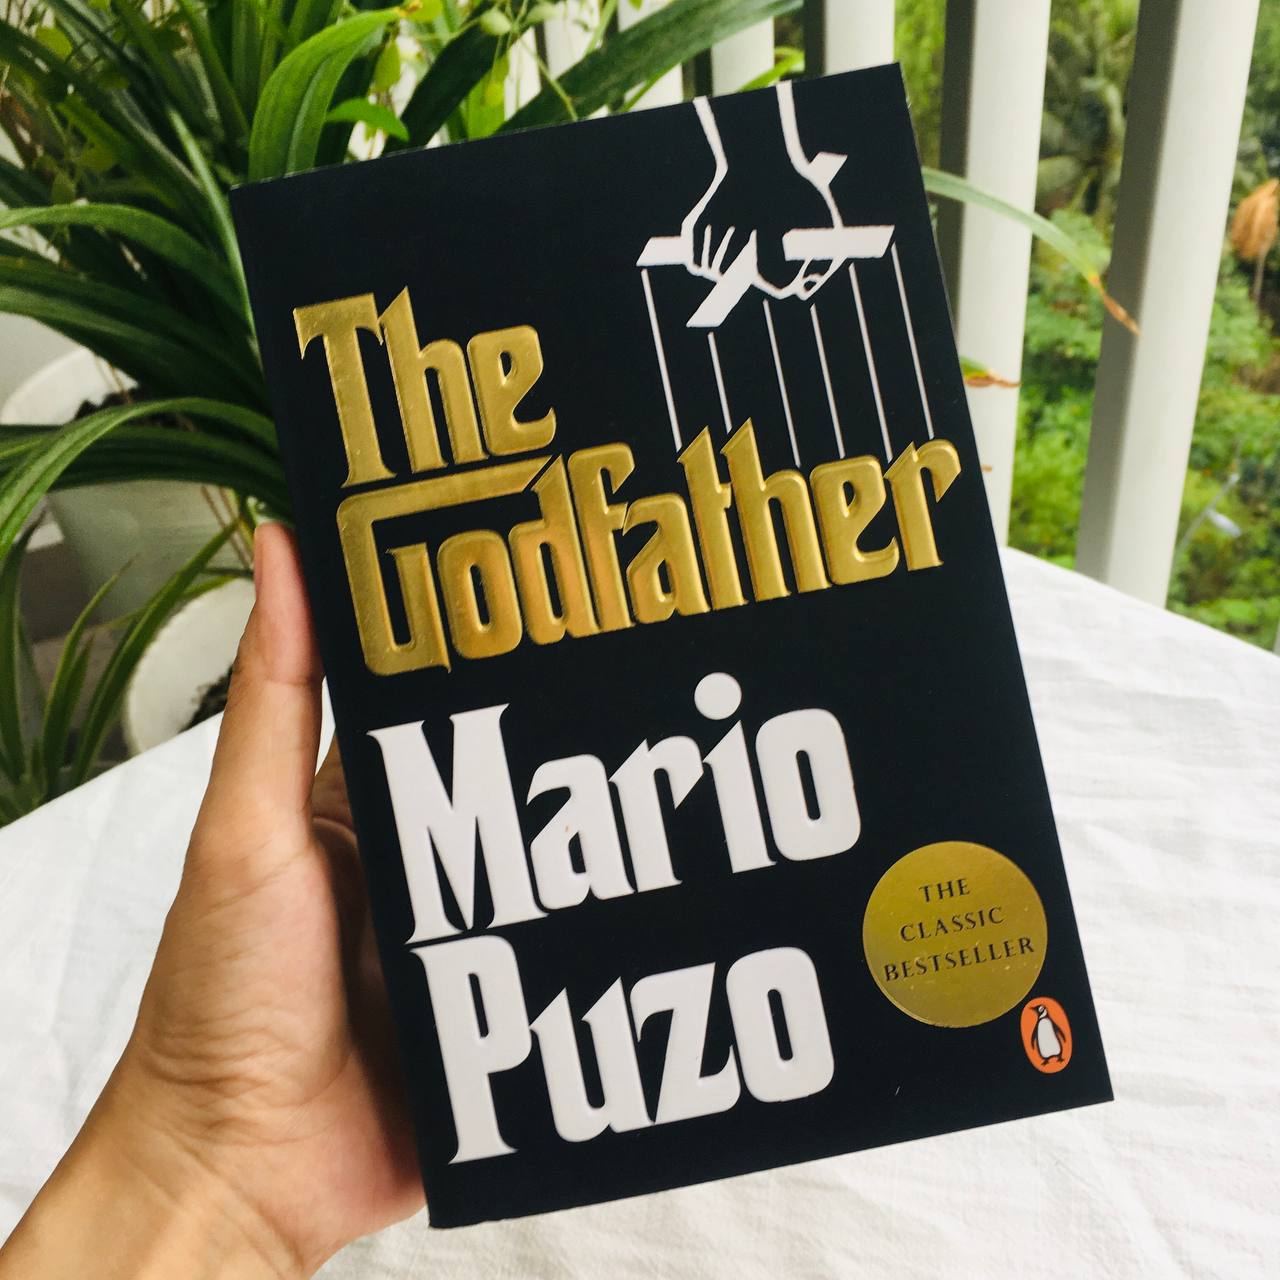 Sách tiếng Anh - The Godfather